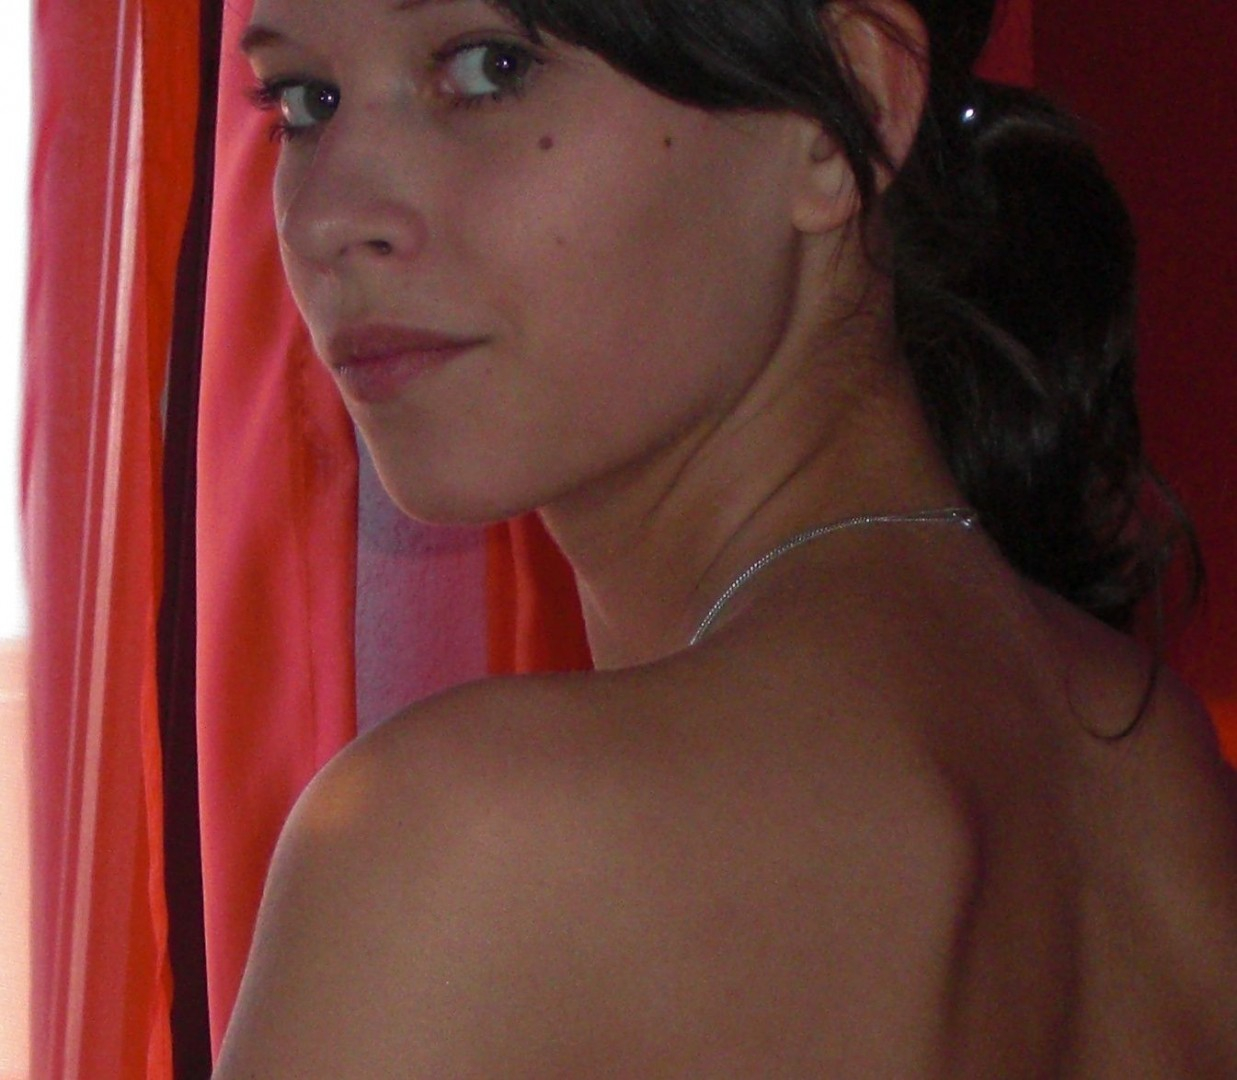 New webslut Anja from germany is free to share with all - N